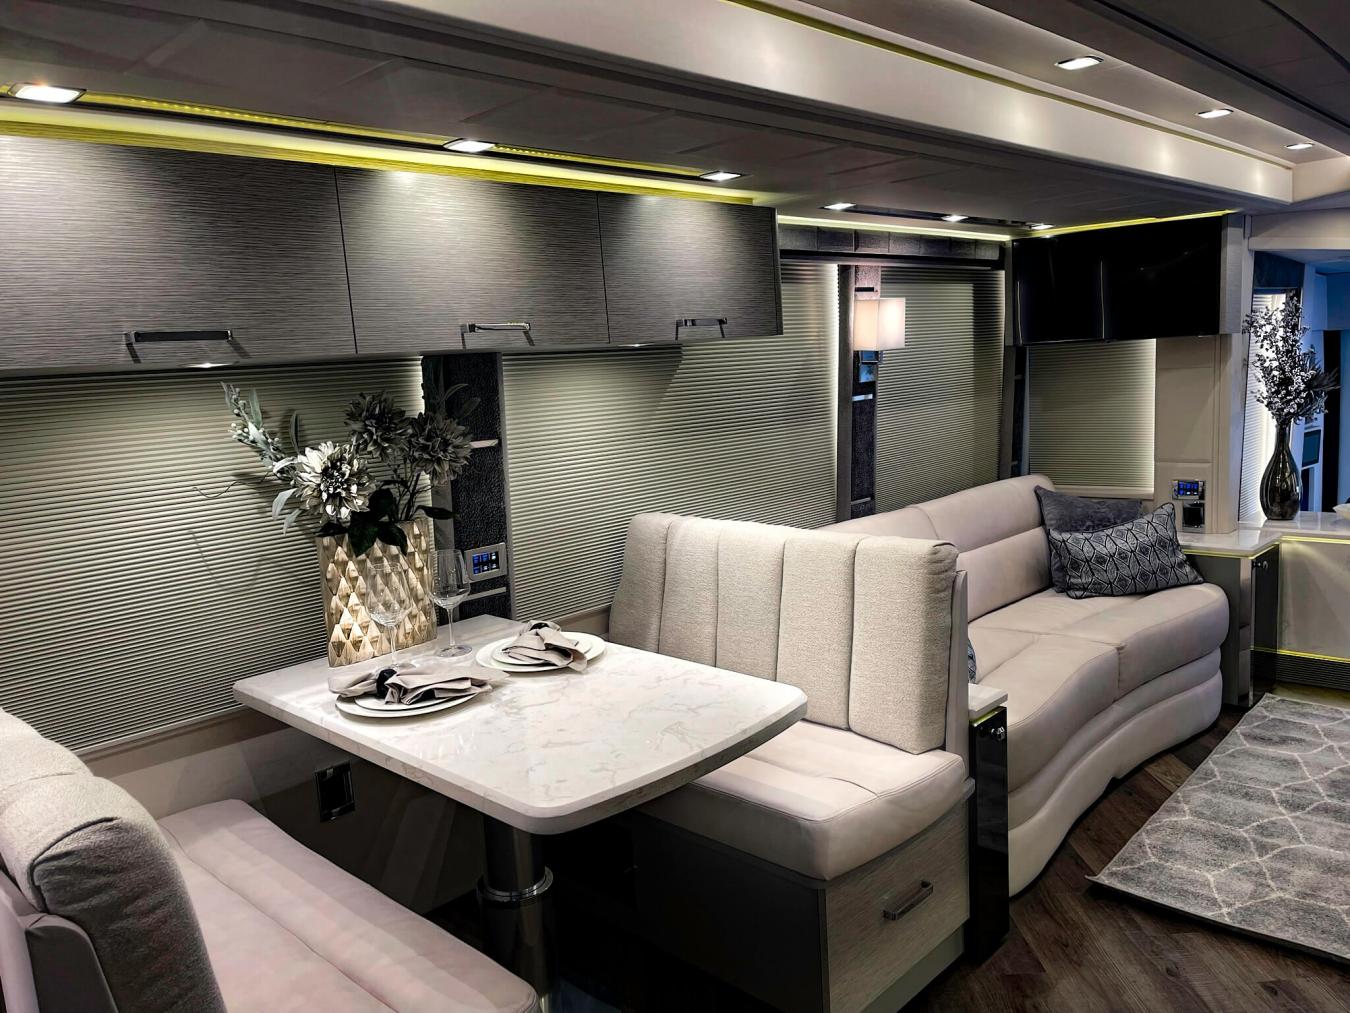 An interior shot of Emerald Luxury Coach RV with a taupe-colored seating area